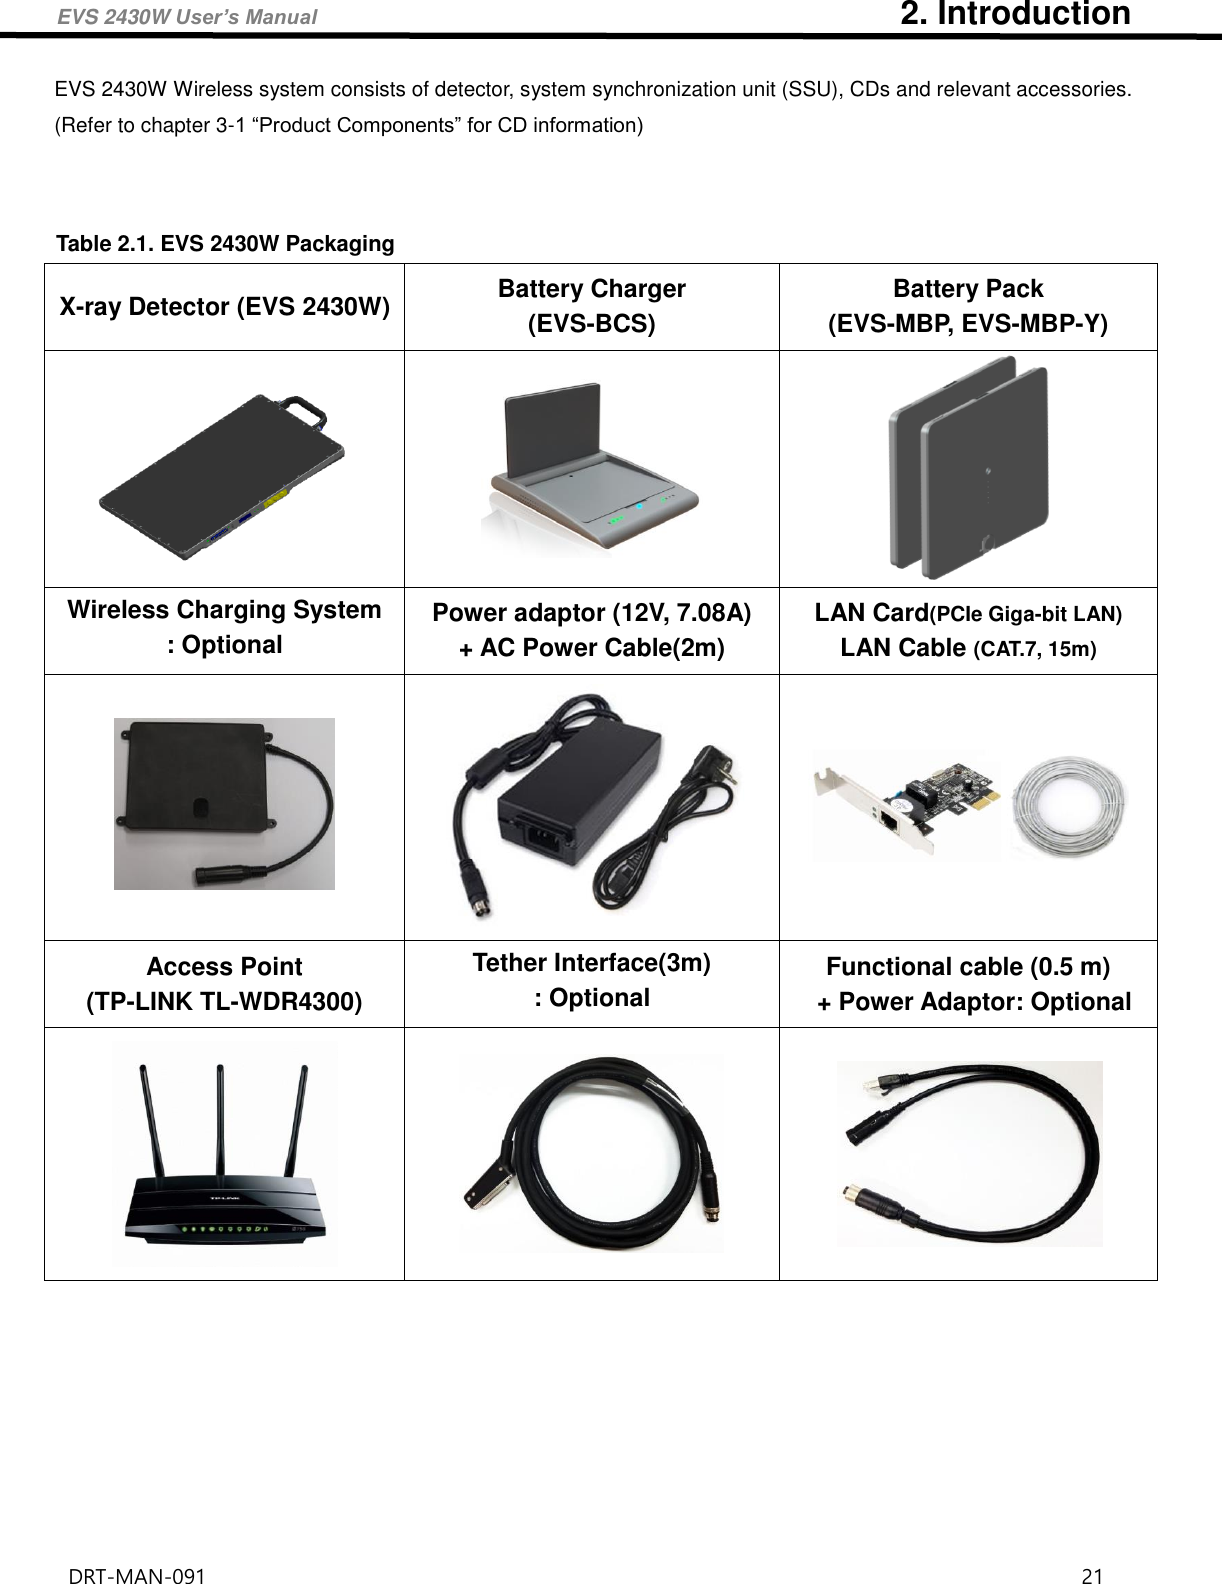 EVS 2430W User’s Manual                                   2. Introduction DRT-MAN-091                                                                                    21   EVS 2430W Wireless system consists of detector, system synchronization unit (SSU), CDs and relevant accessories. (Refer to chapter 3-1 “Product Components” for CD information)    Table 2.1. EVS 2430W Packaging X-ray Detector (EVS 2430W) Battery Charger (EVS-BCS) Battery Pack (EVS-MBP, EVS-MBP-Y)    Wireless Charging System : Optional Power adaptor (12V, 7.08A) + AC Power Cable(2m) LAN Card(PCIe Giga-bit LAN) LAN Cable (CAT.7, 15m)    Access Point (TP-LINK TL-WDR4300) Tether Interface(3m)   : Optional Functional cable (0.5 m)   + Power Adaptor: Optional        